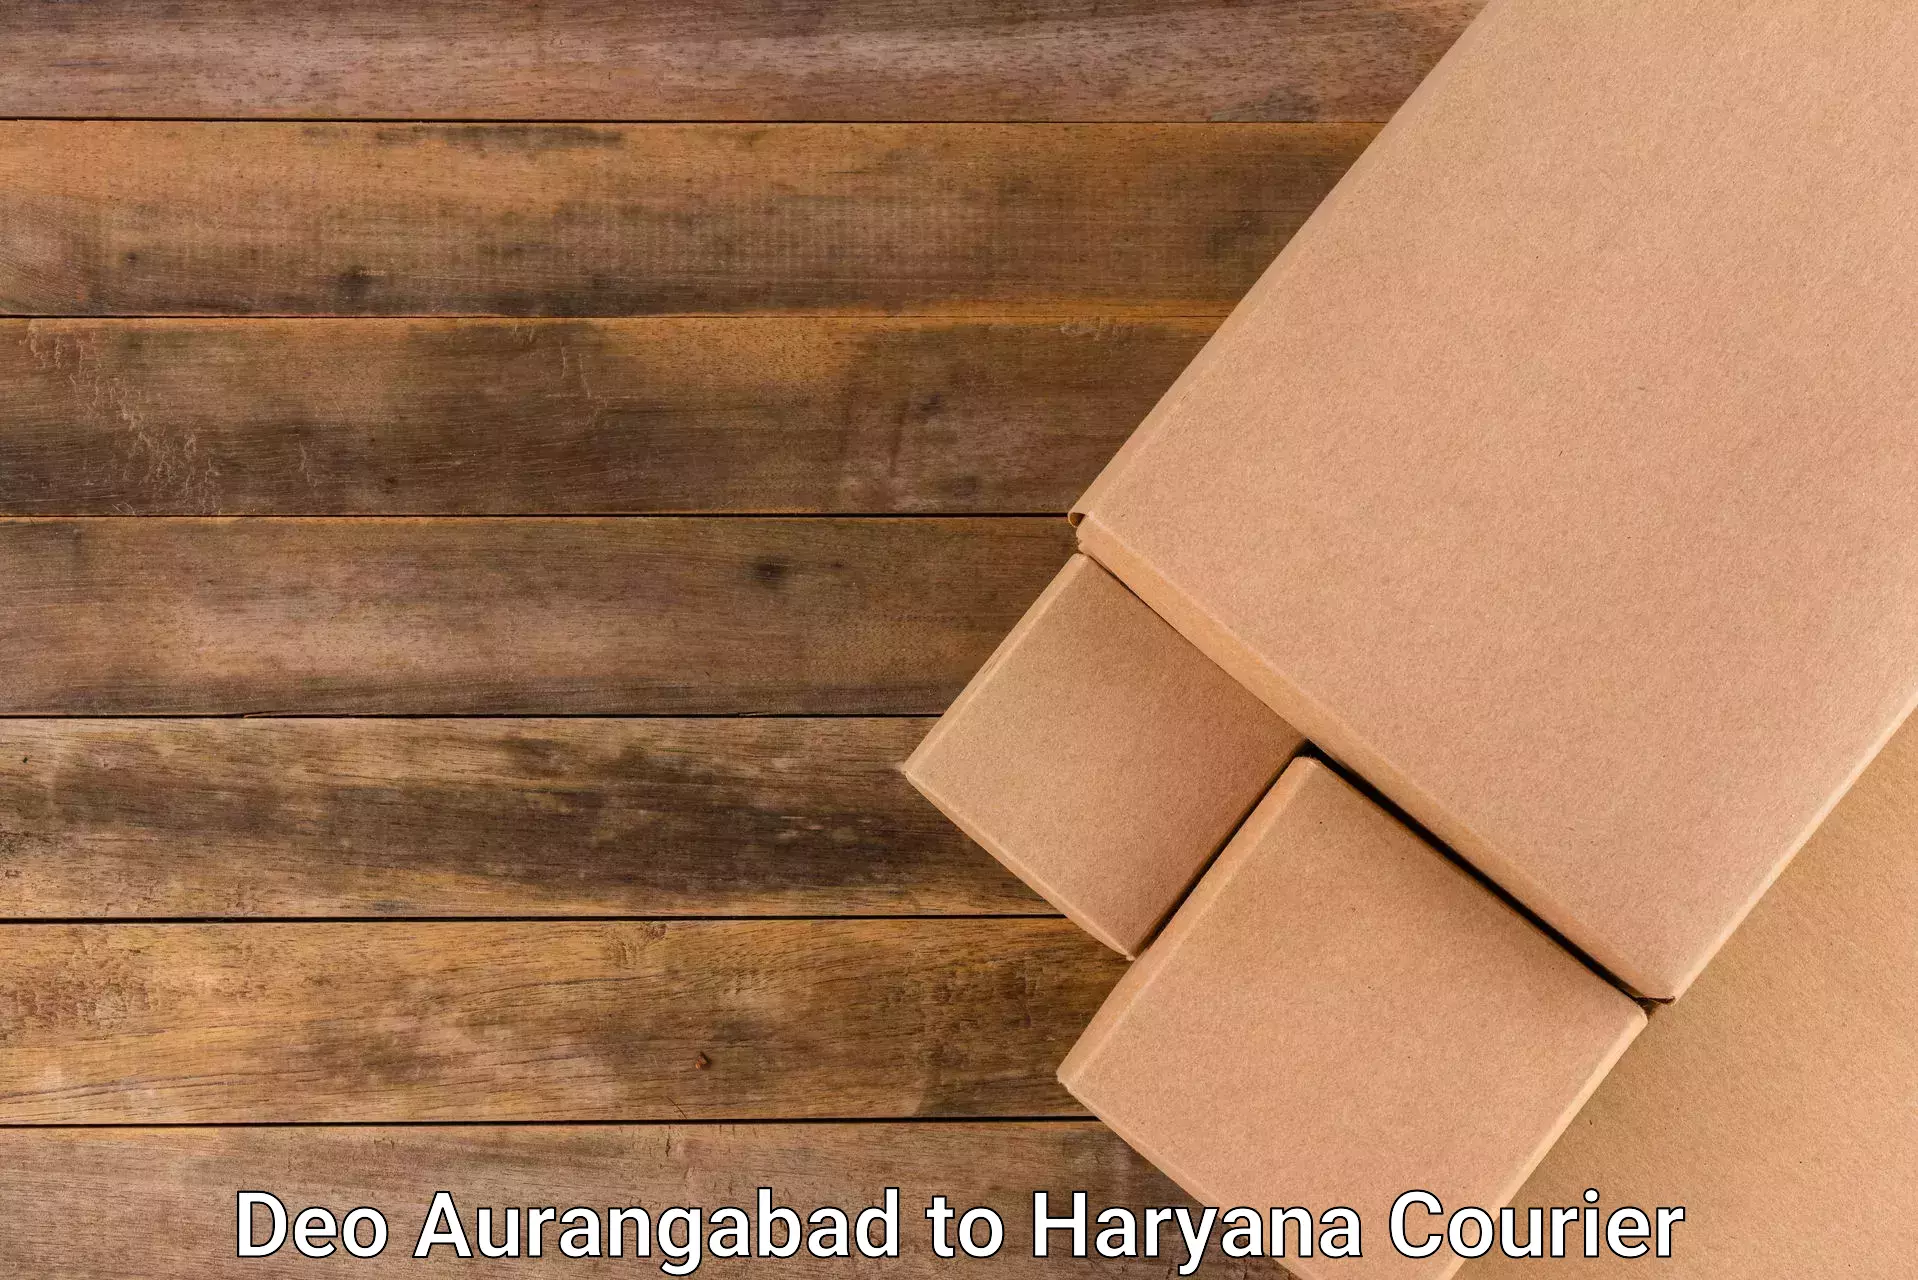 Comprehensive freight services Deo Aurangabad to Chaudhary Charan Singh Haryana Agricultural University Hisar